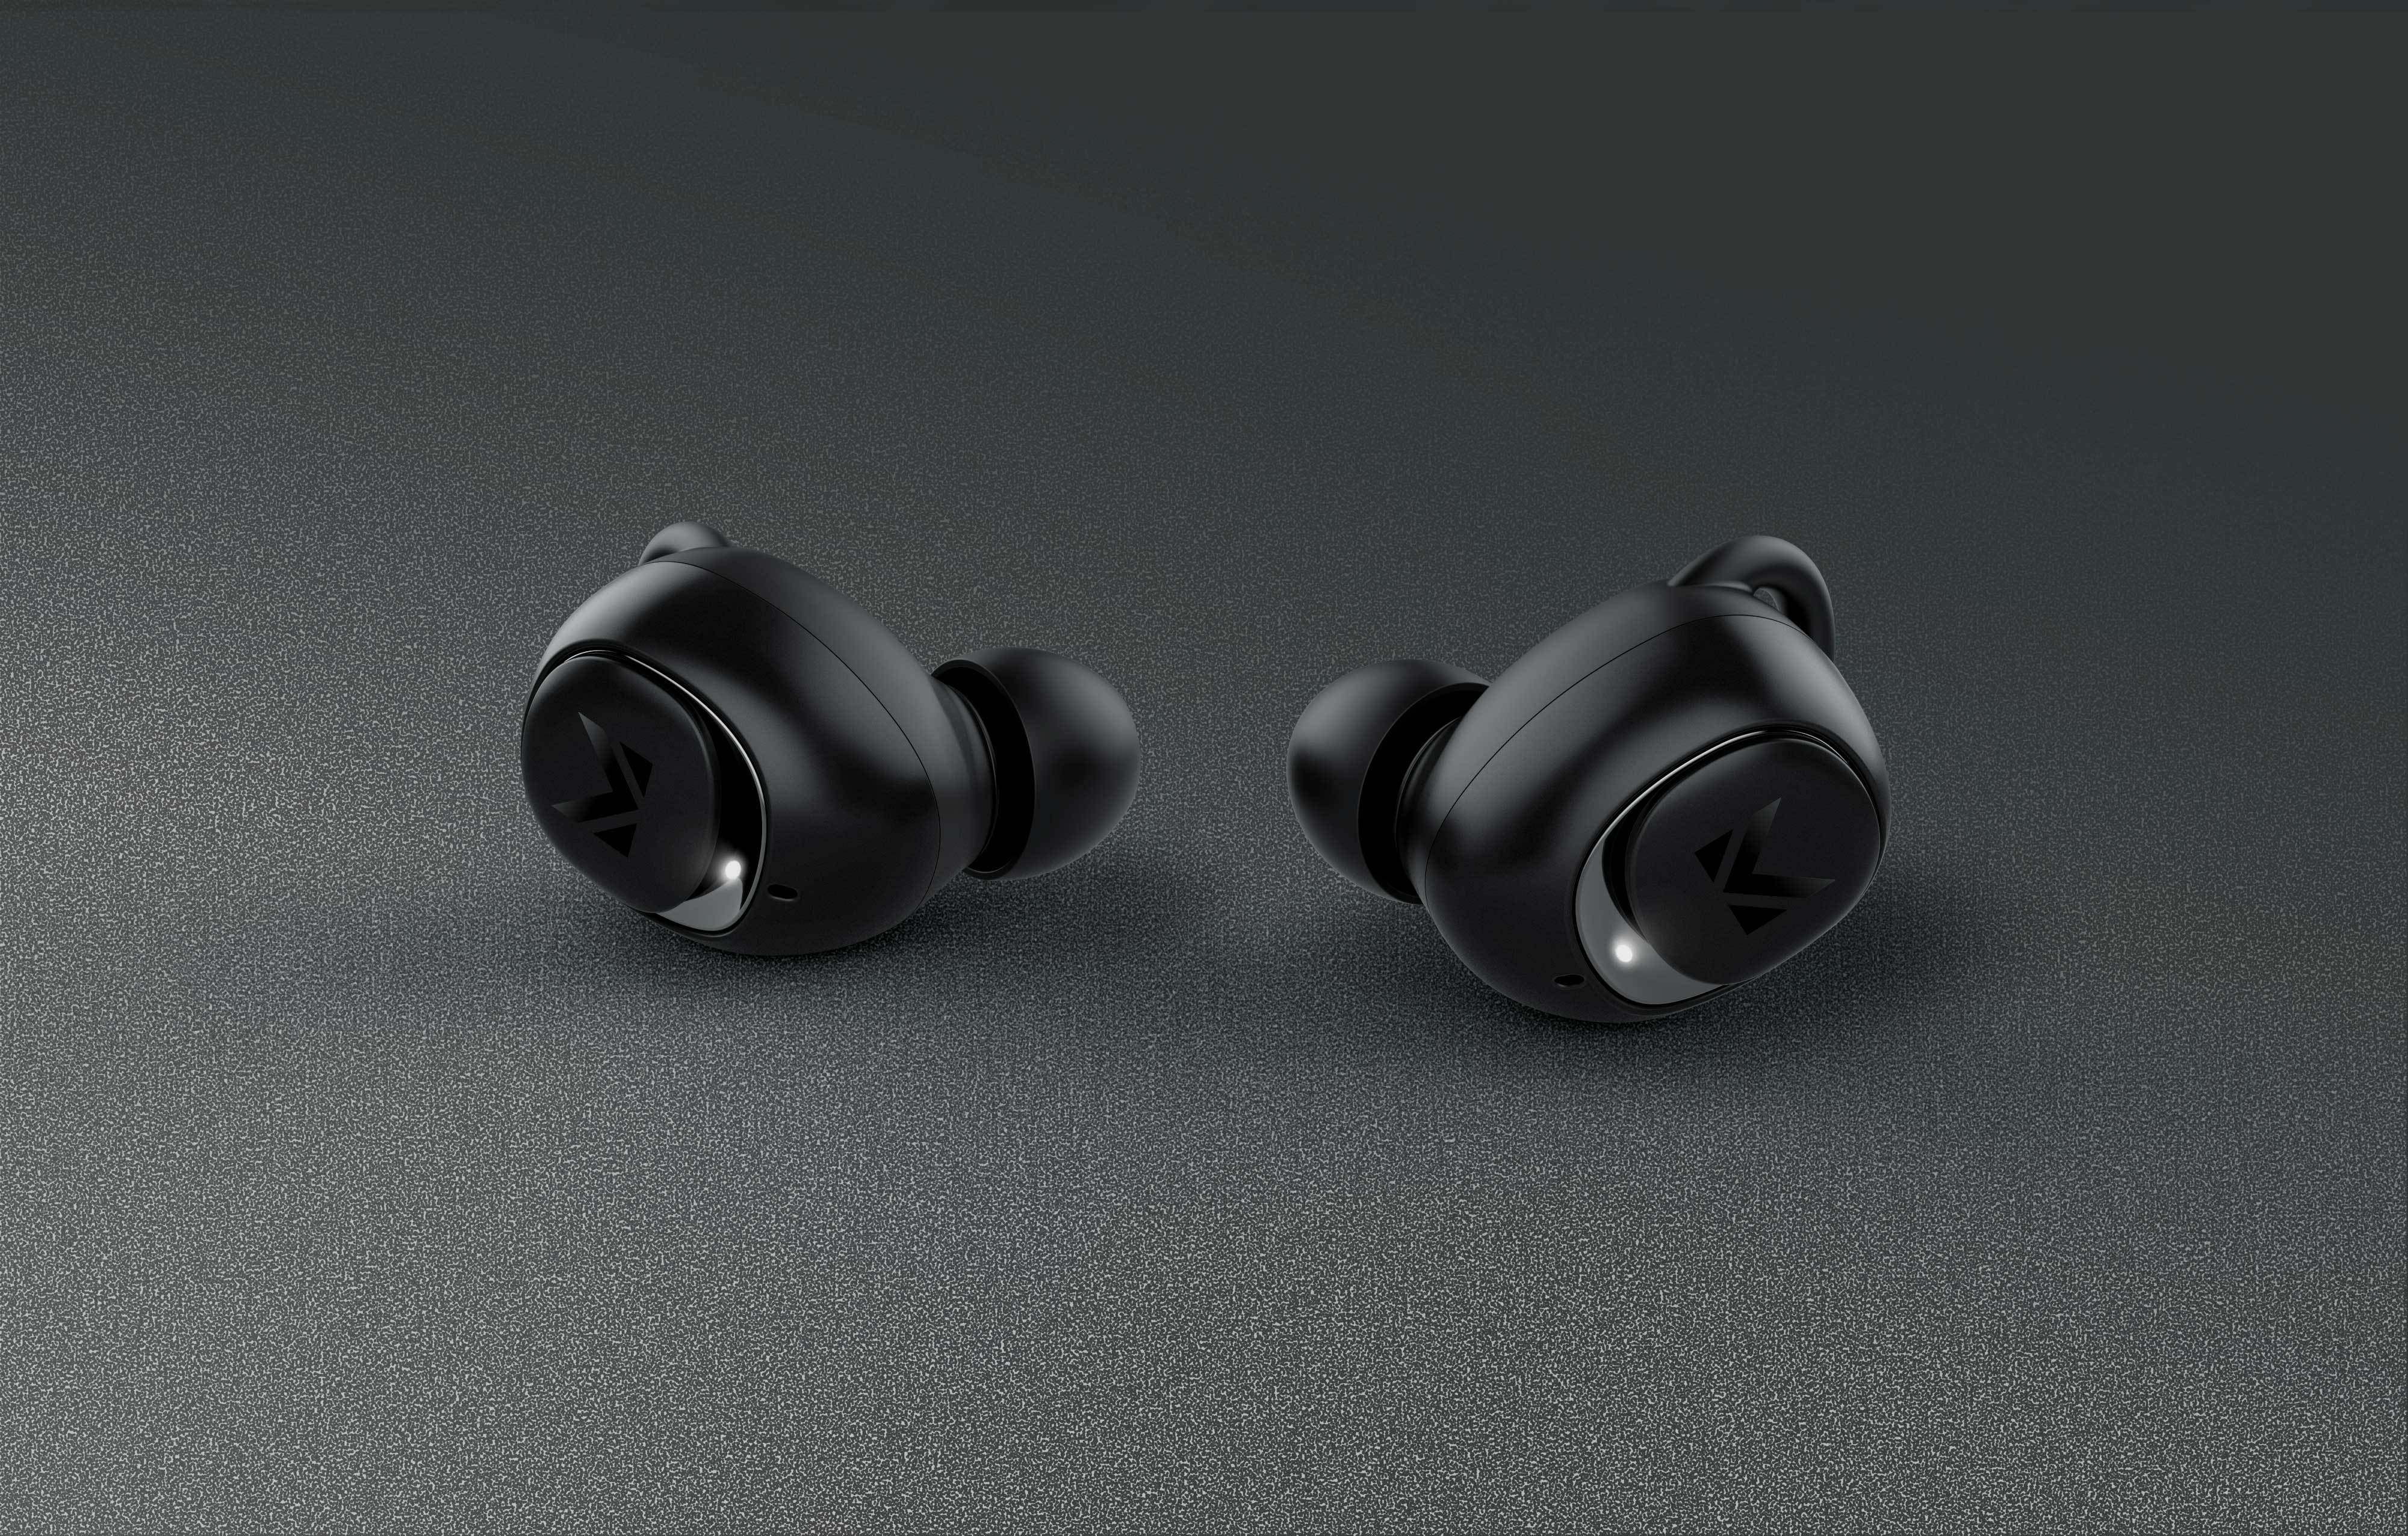 MULTITED RX Sport Wireless Earbuds have 100 hours of playback for $52